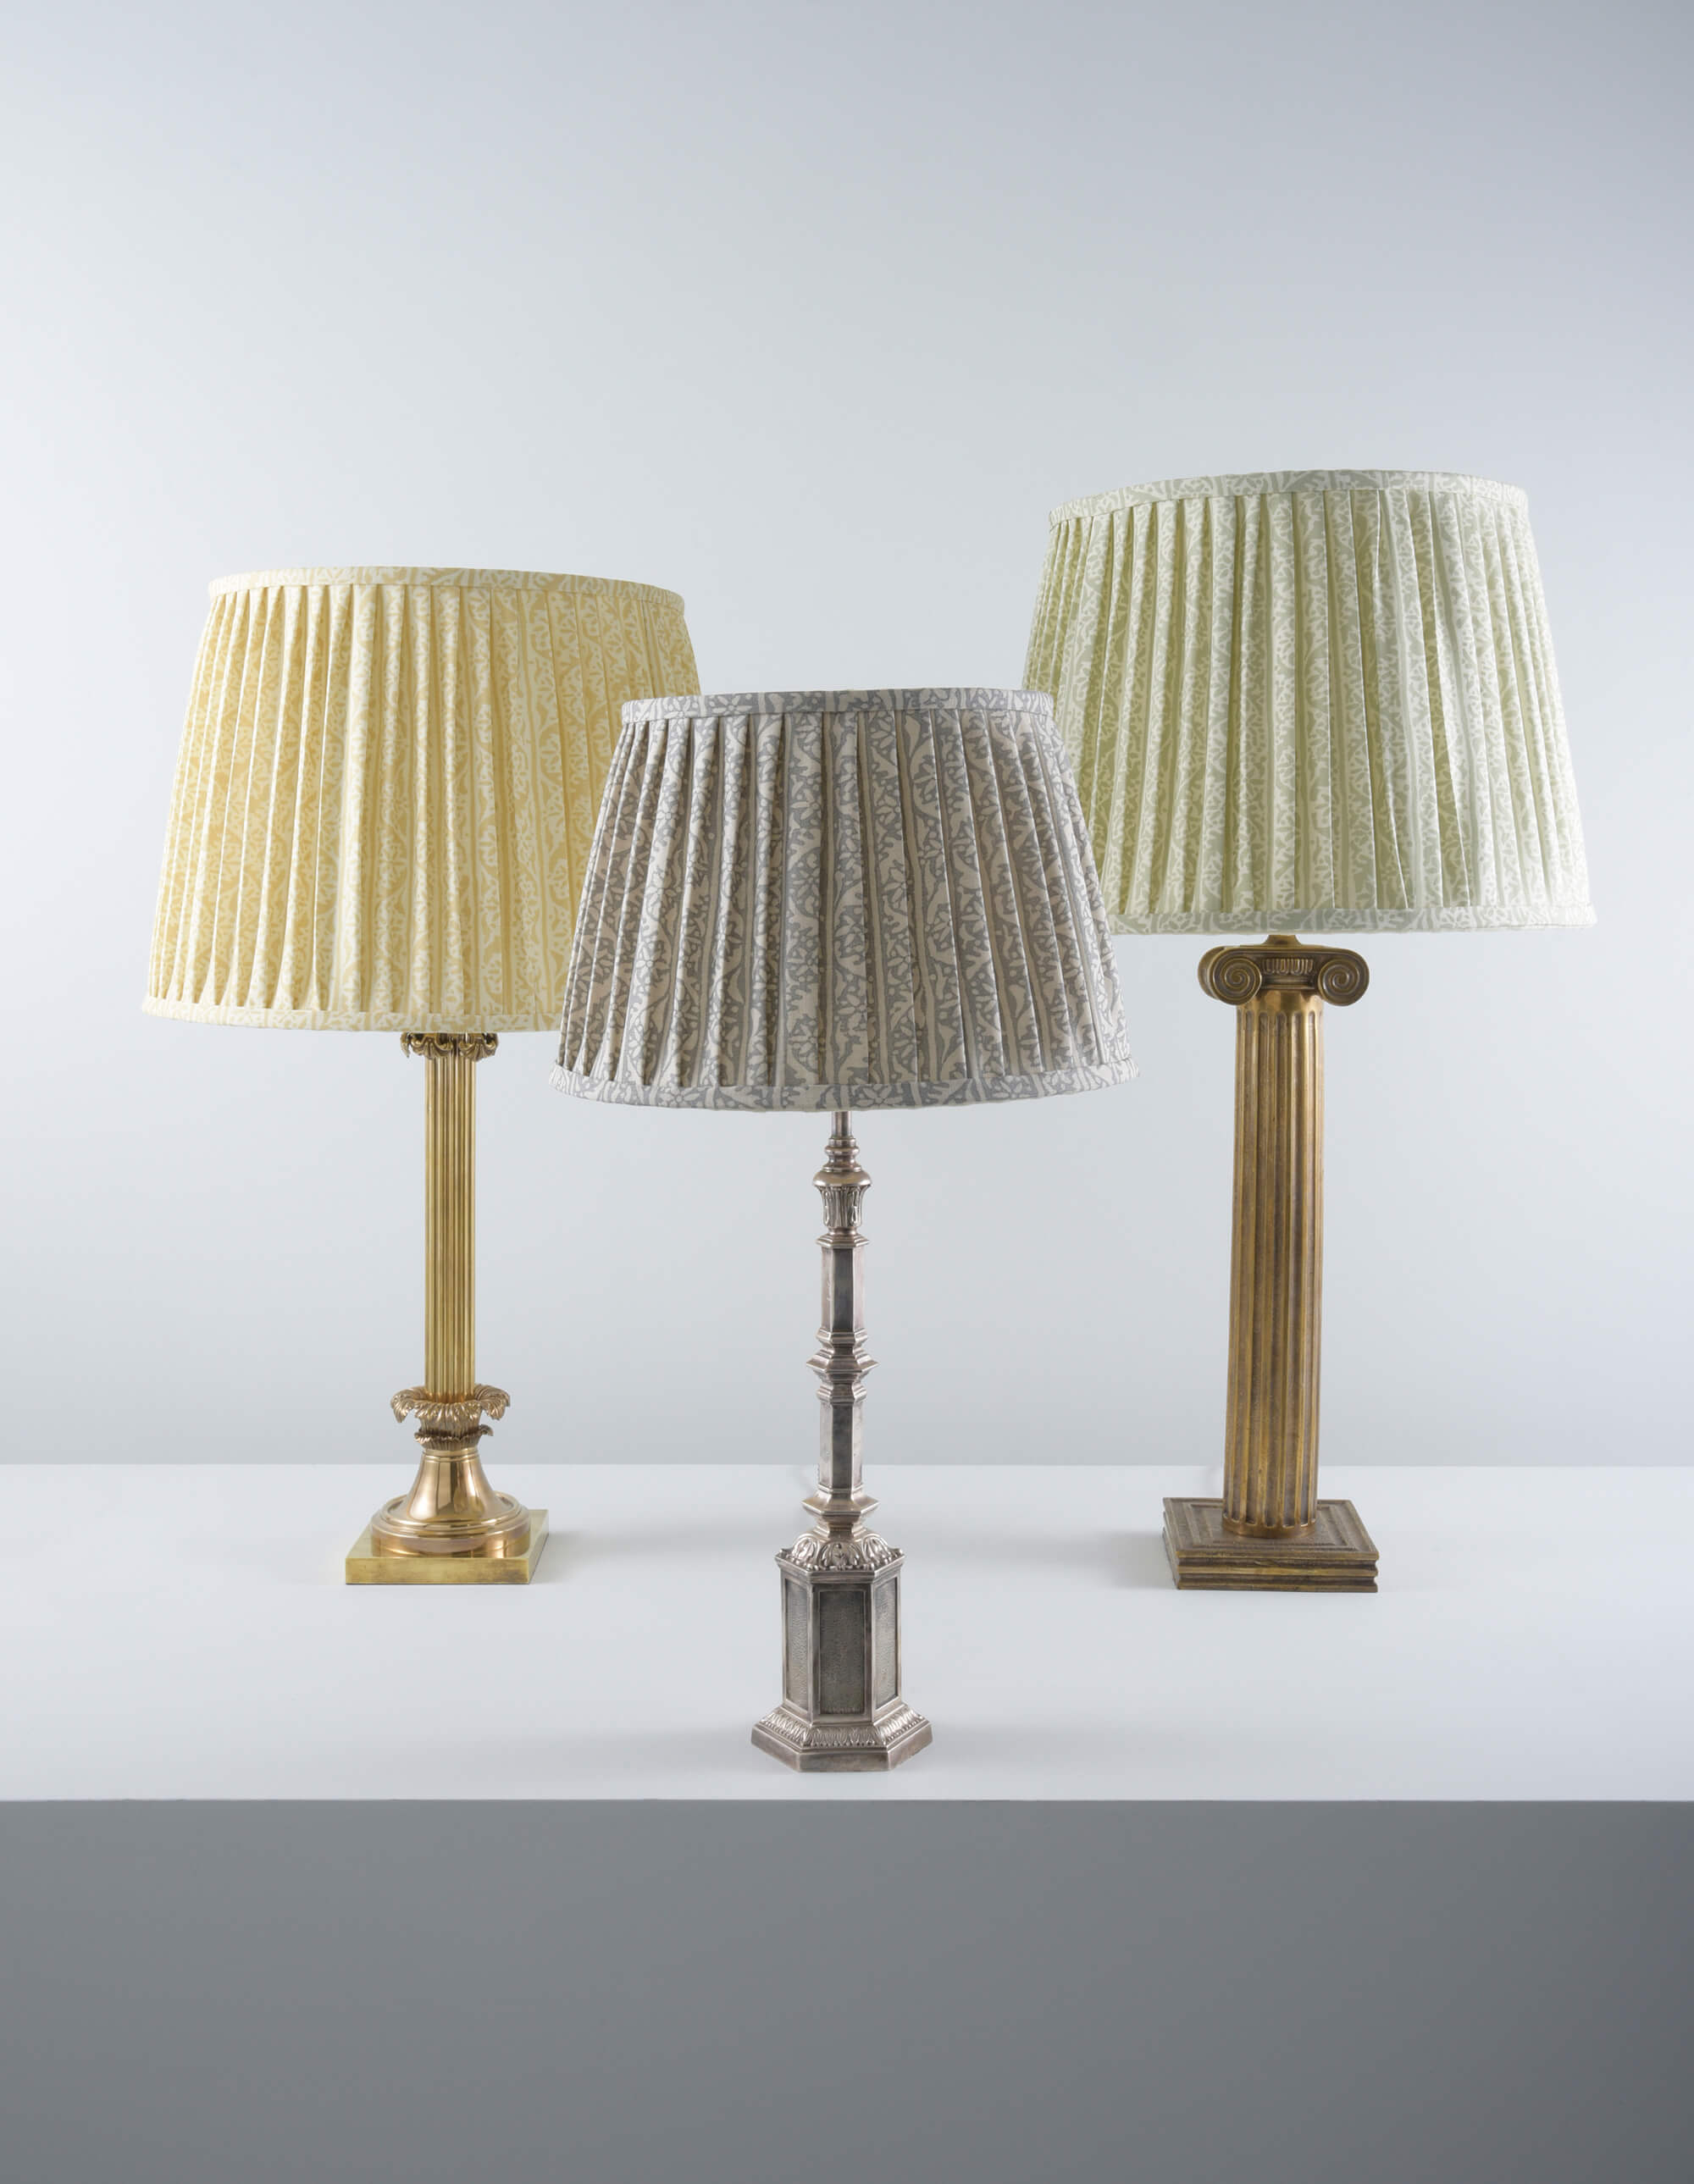 Neoclassical solid brass table lamps by Collier Webb